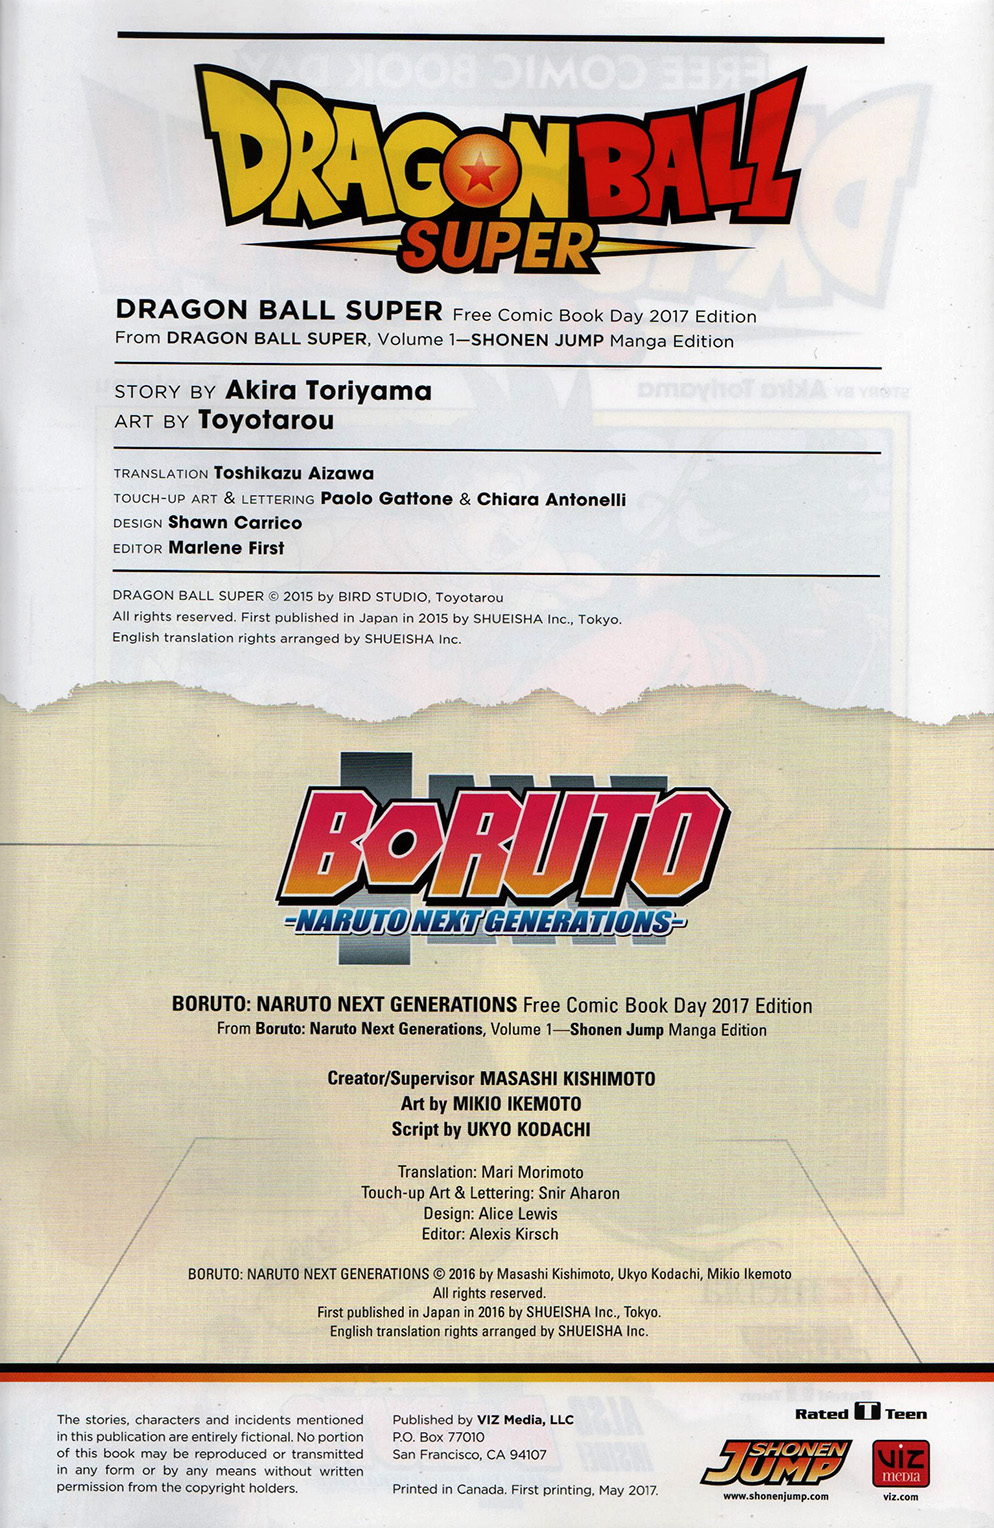 Read online Free Comic Book Day 2017 comic -  Issue # Dragon Ball Super - 3